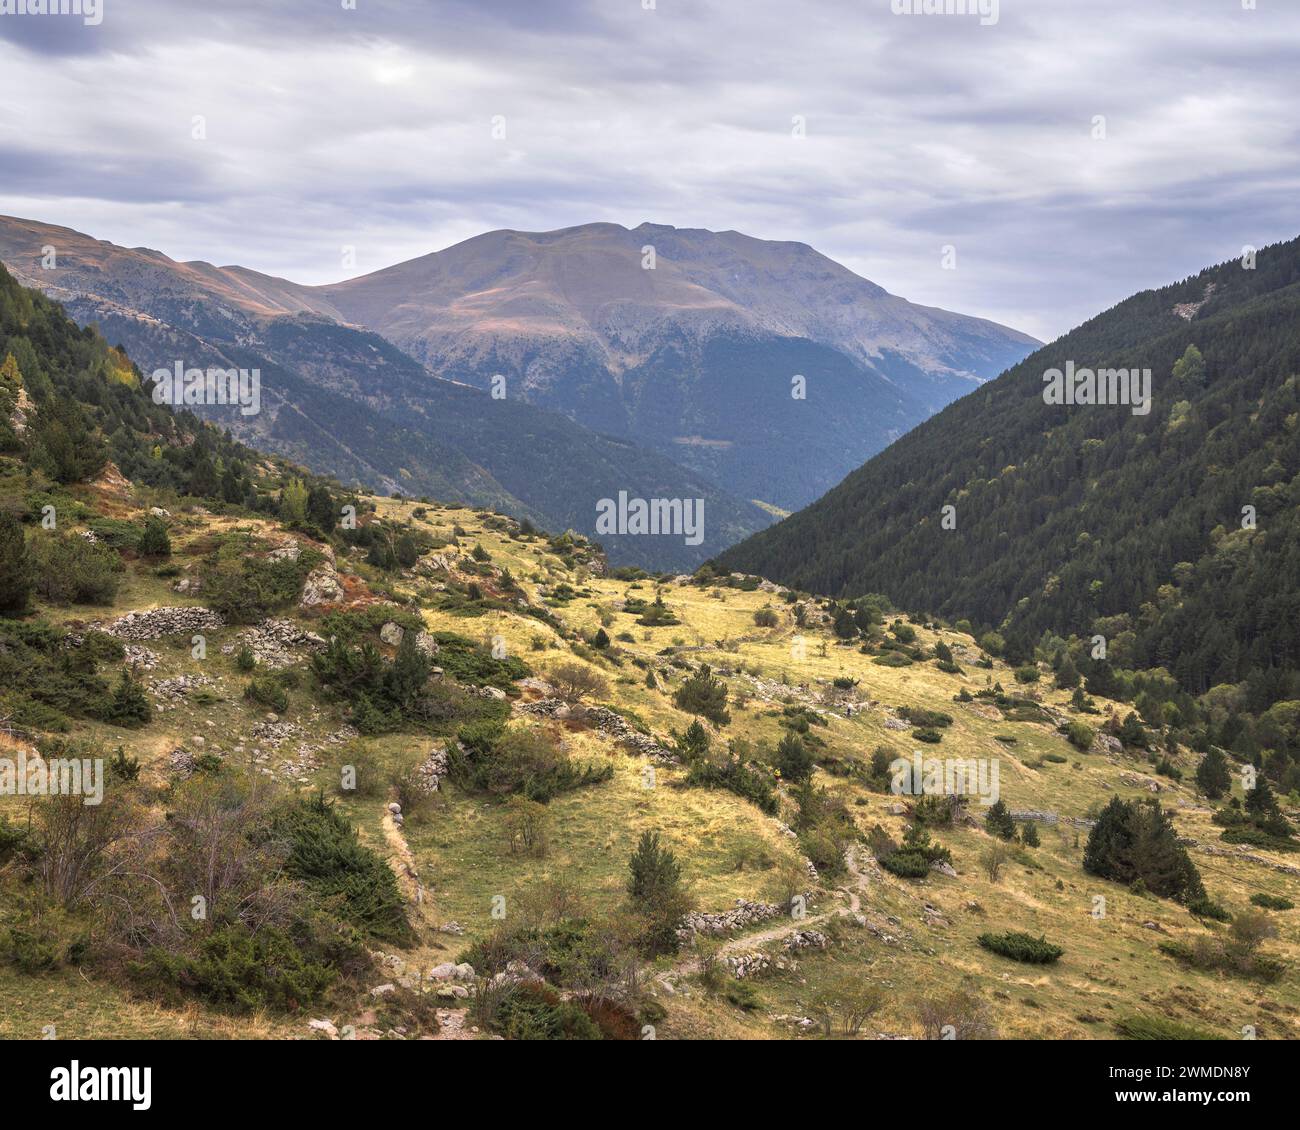 Valley in Vall Fosca in the Catalan Pyrenees, featuring trees and mountains in the background Stock Photo